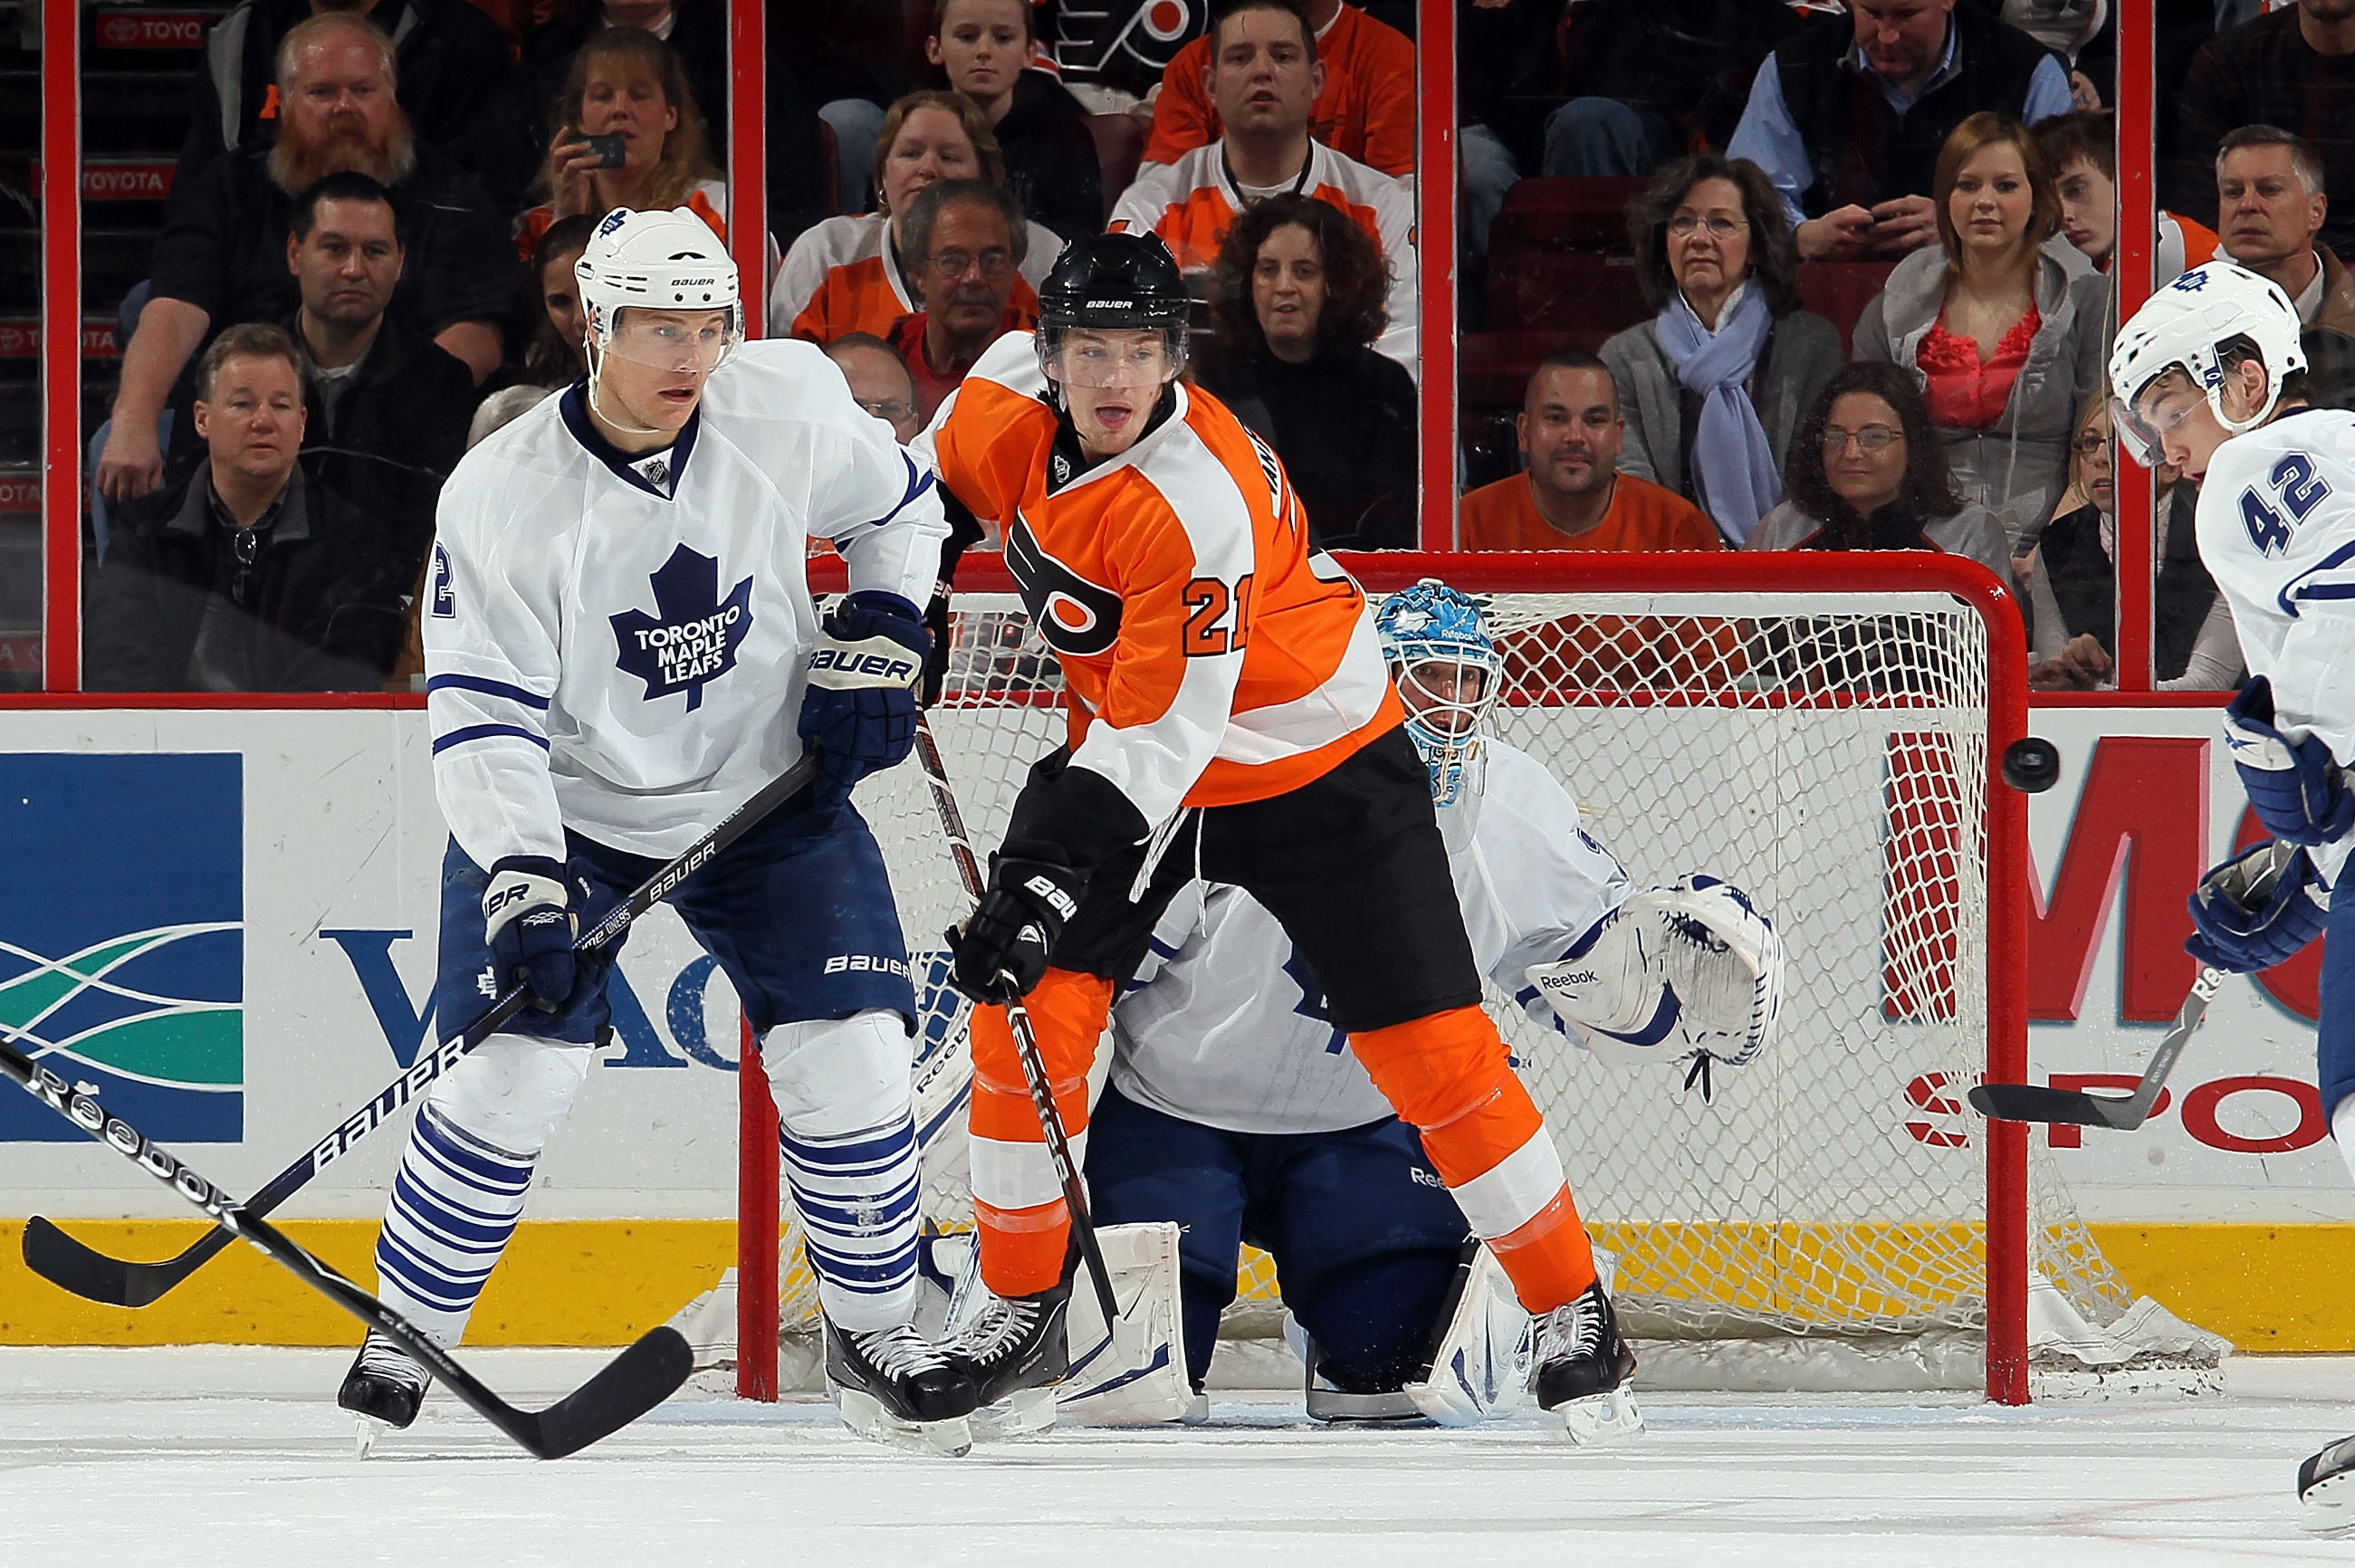 Matinee madness: James van Riemsdyk raising trade stock as Flyers visit  Maple Leafs - TheLeafsNation